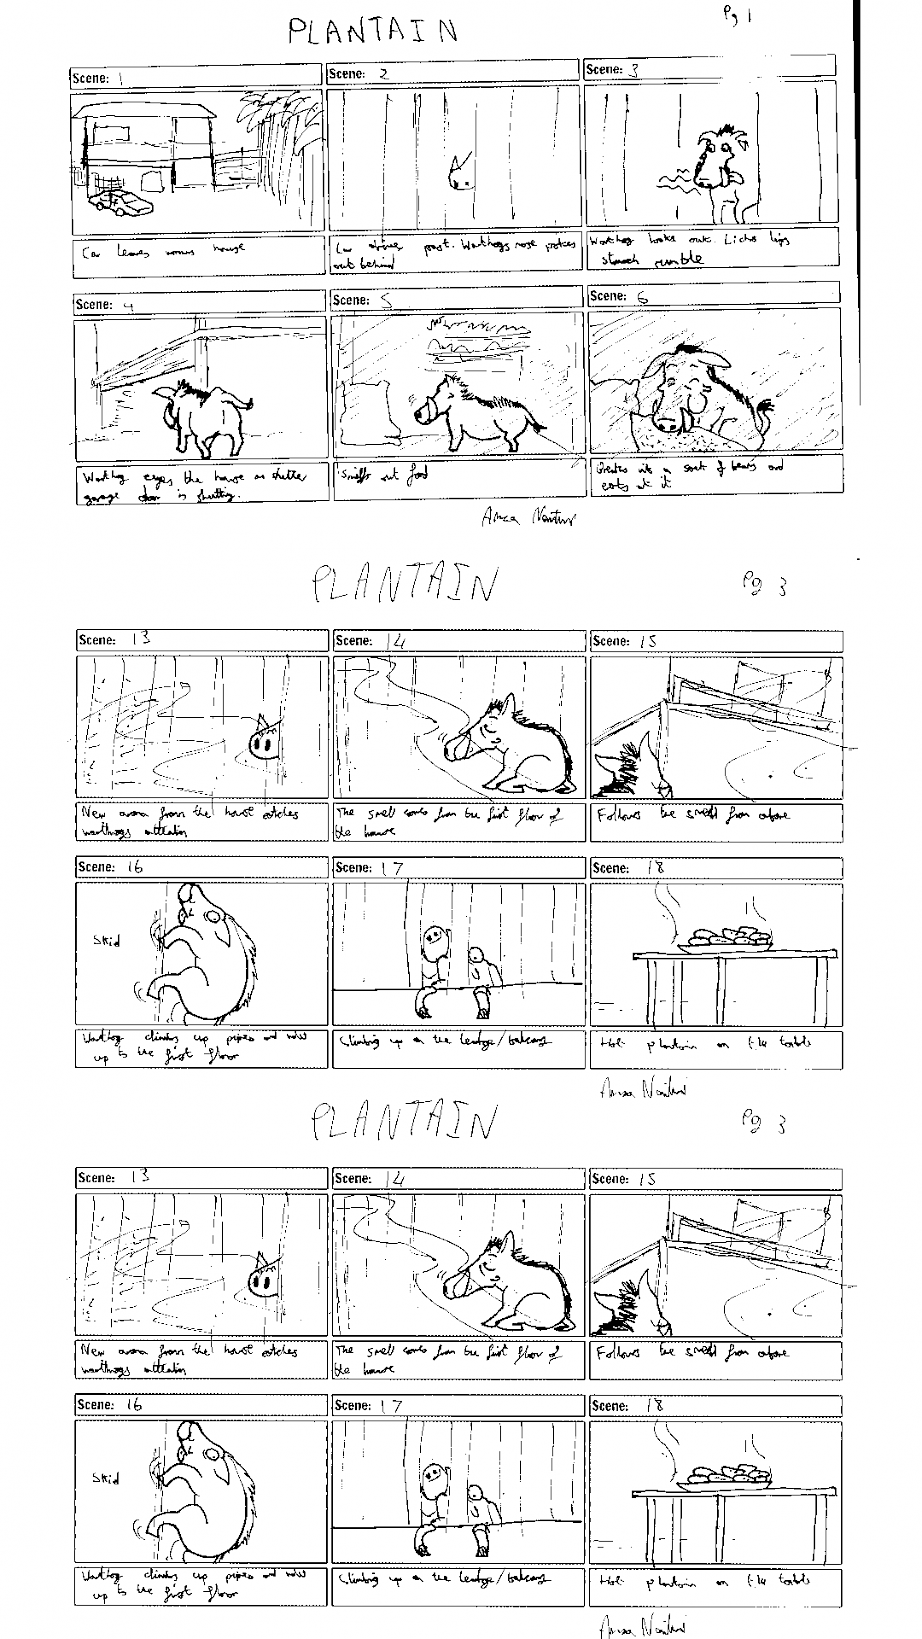 Early Storyboards for PLANTAIN